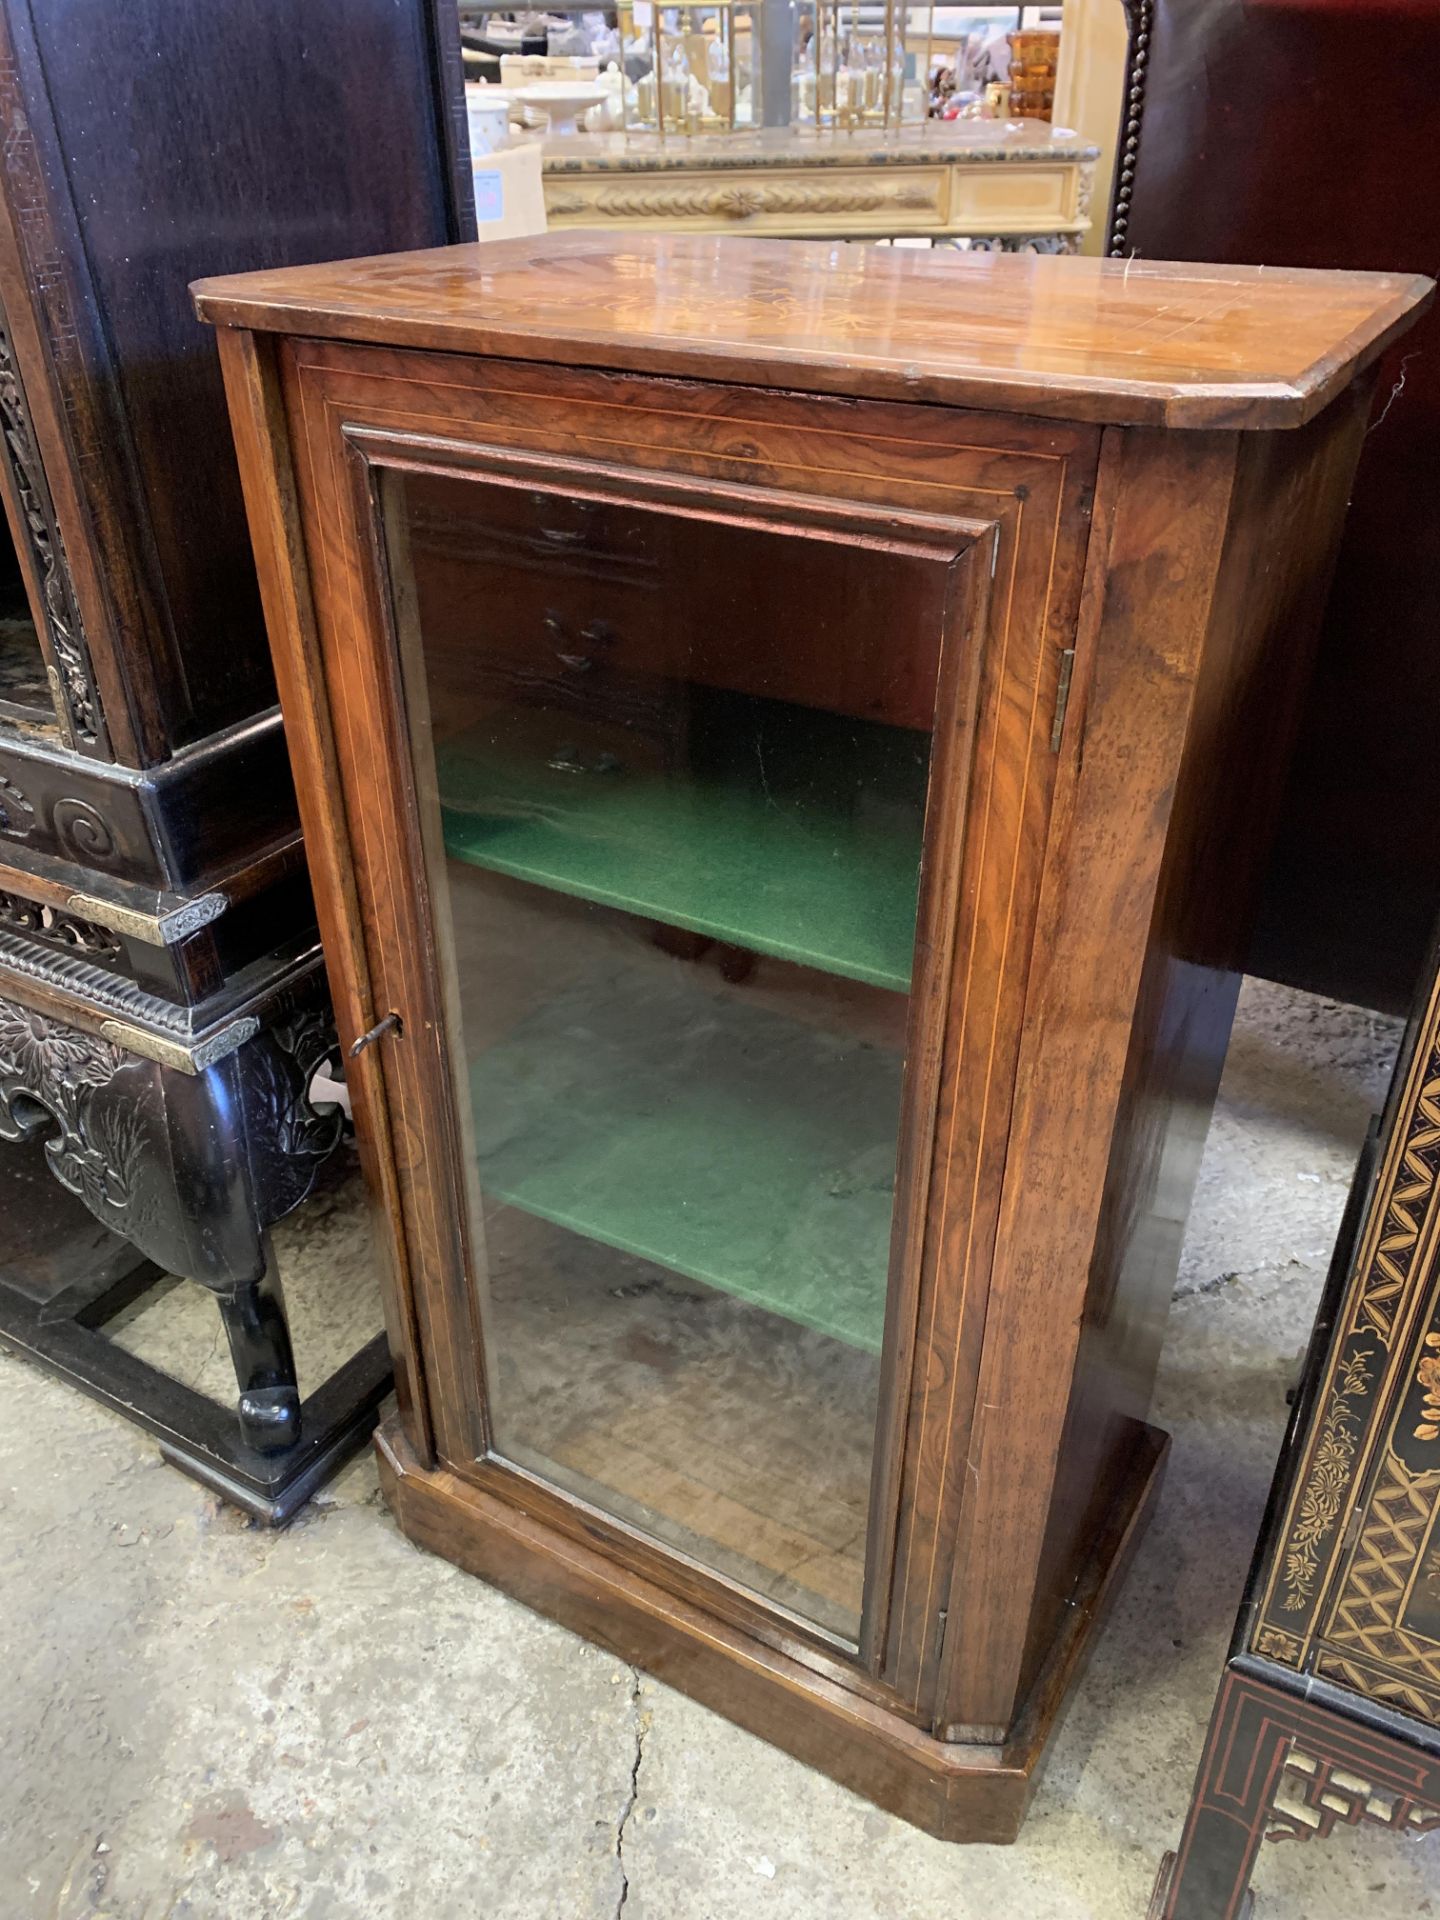 Inlaid walnut and mahogany glass fronted cabinet